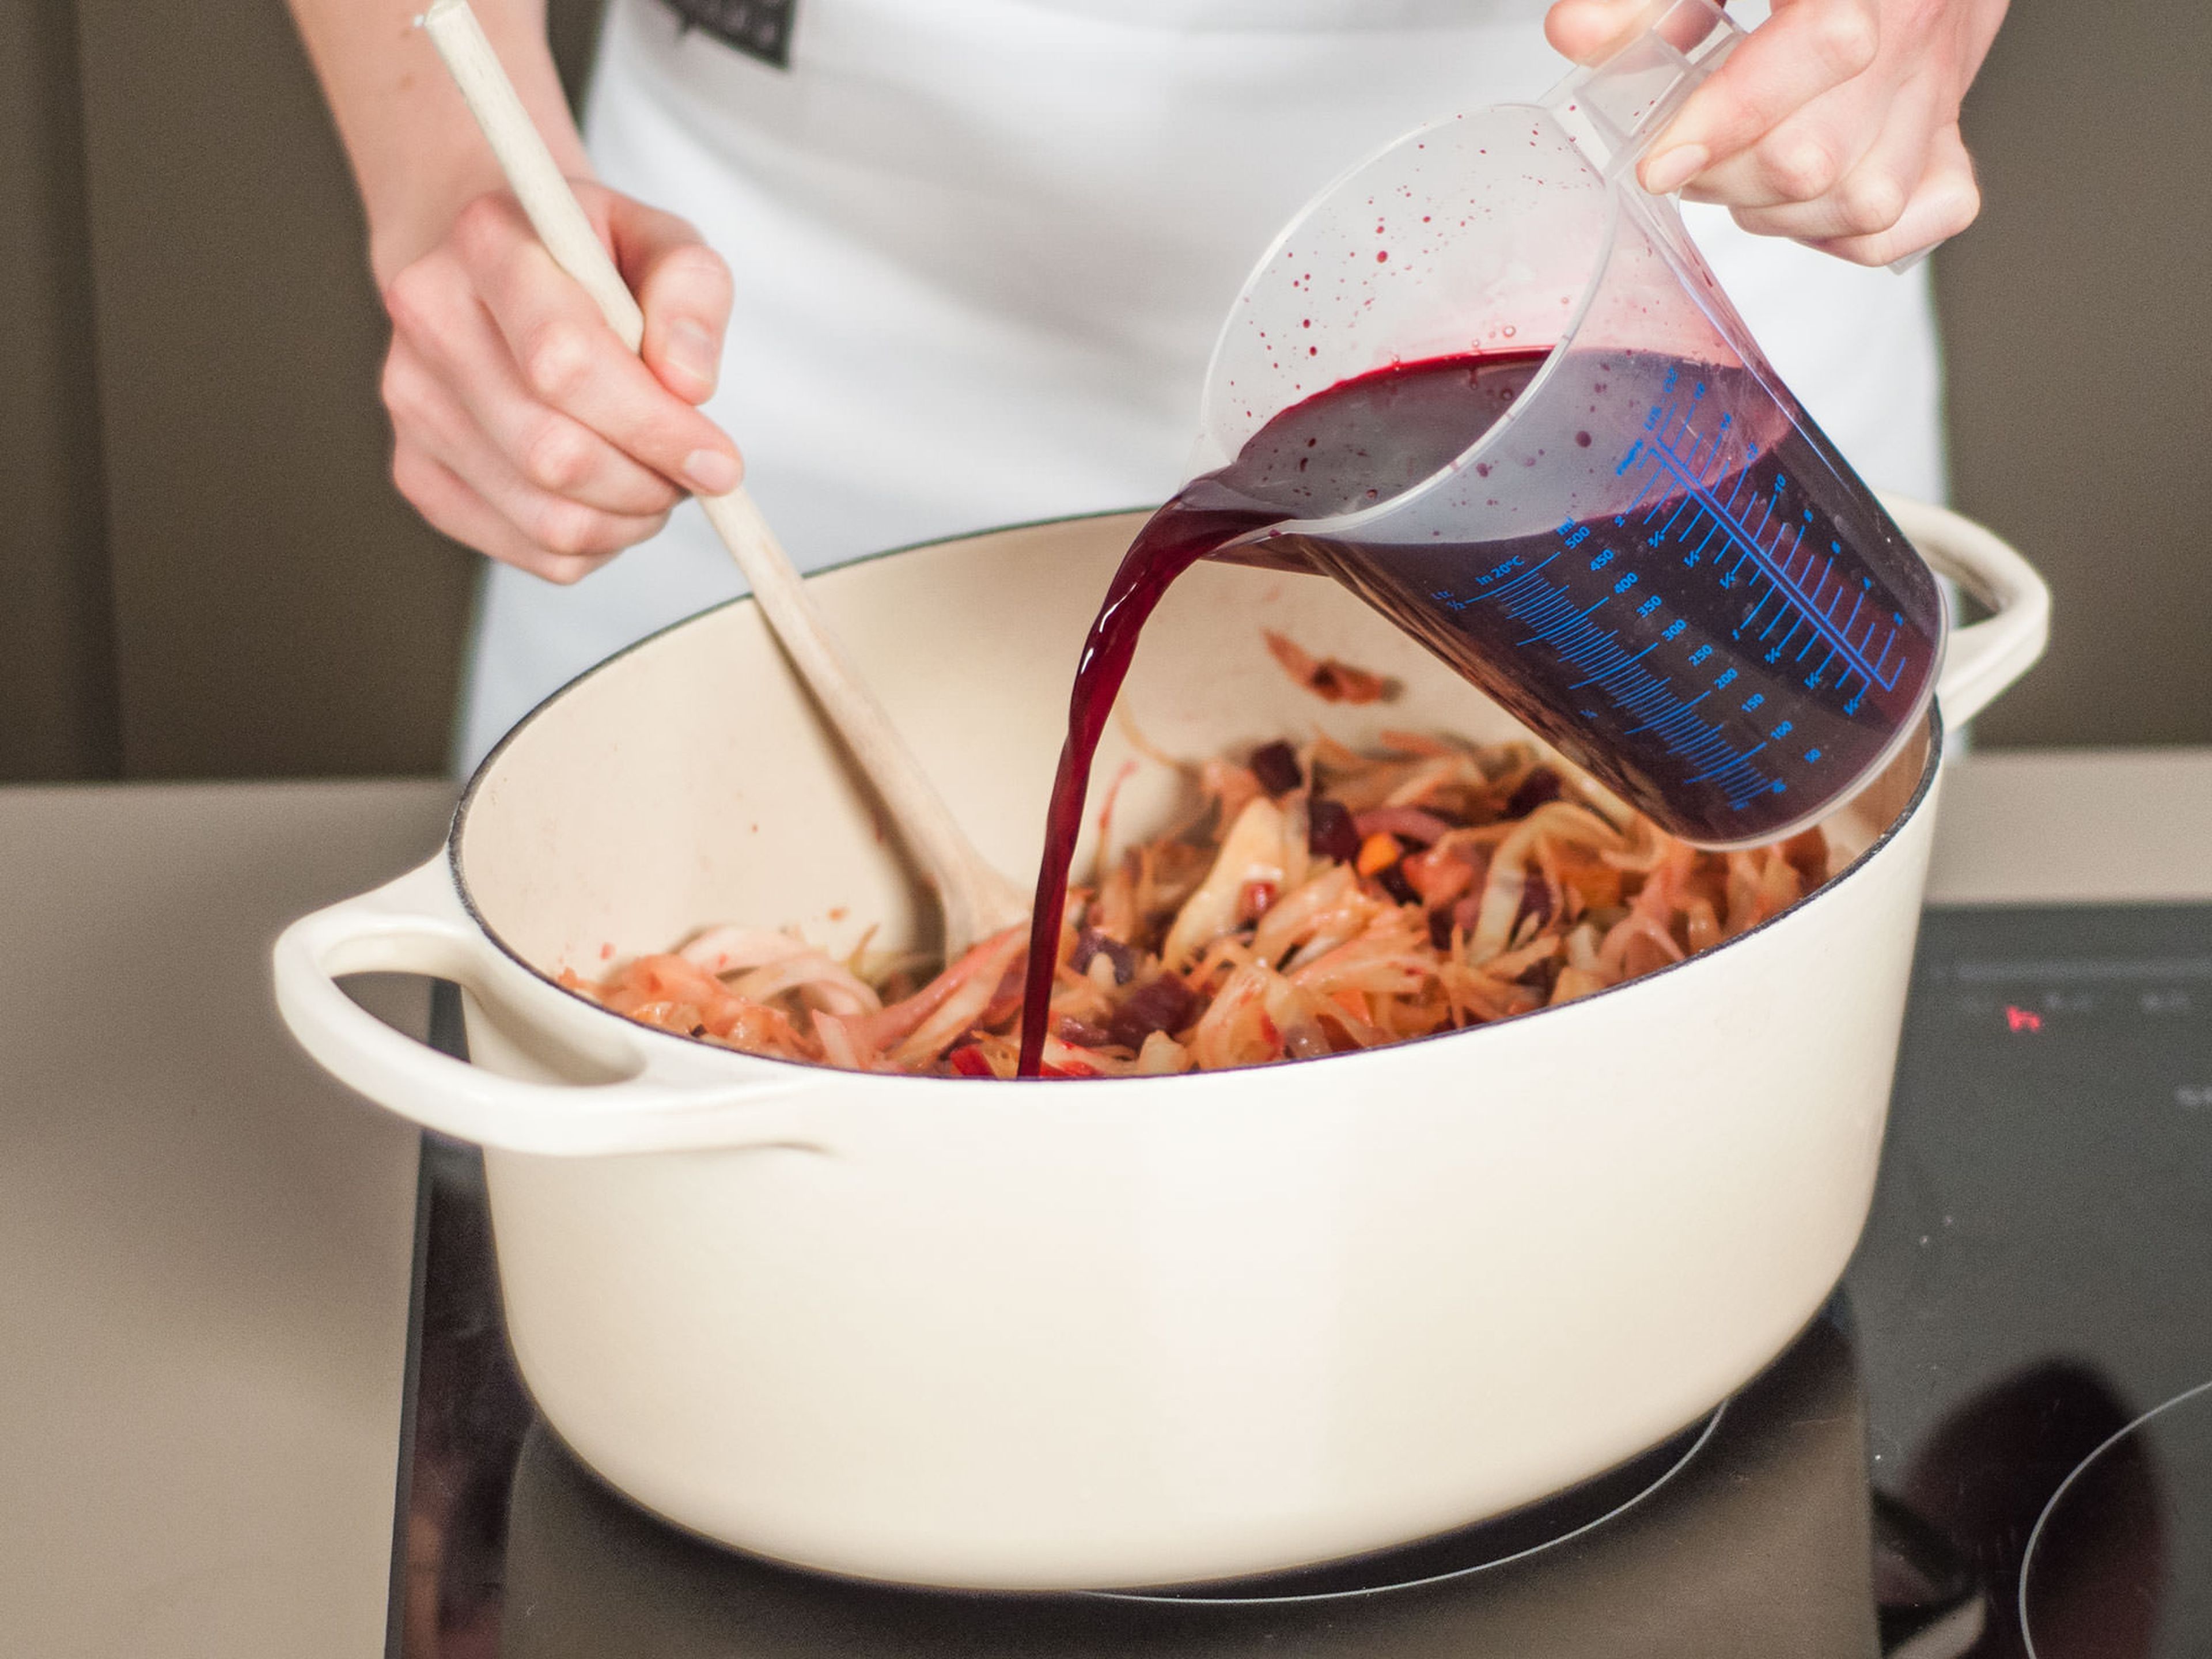 Deglaze pan with beet juice and allow to reduce for approx. 15 - 20 min.